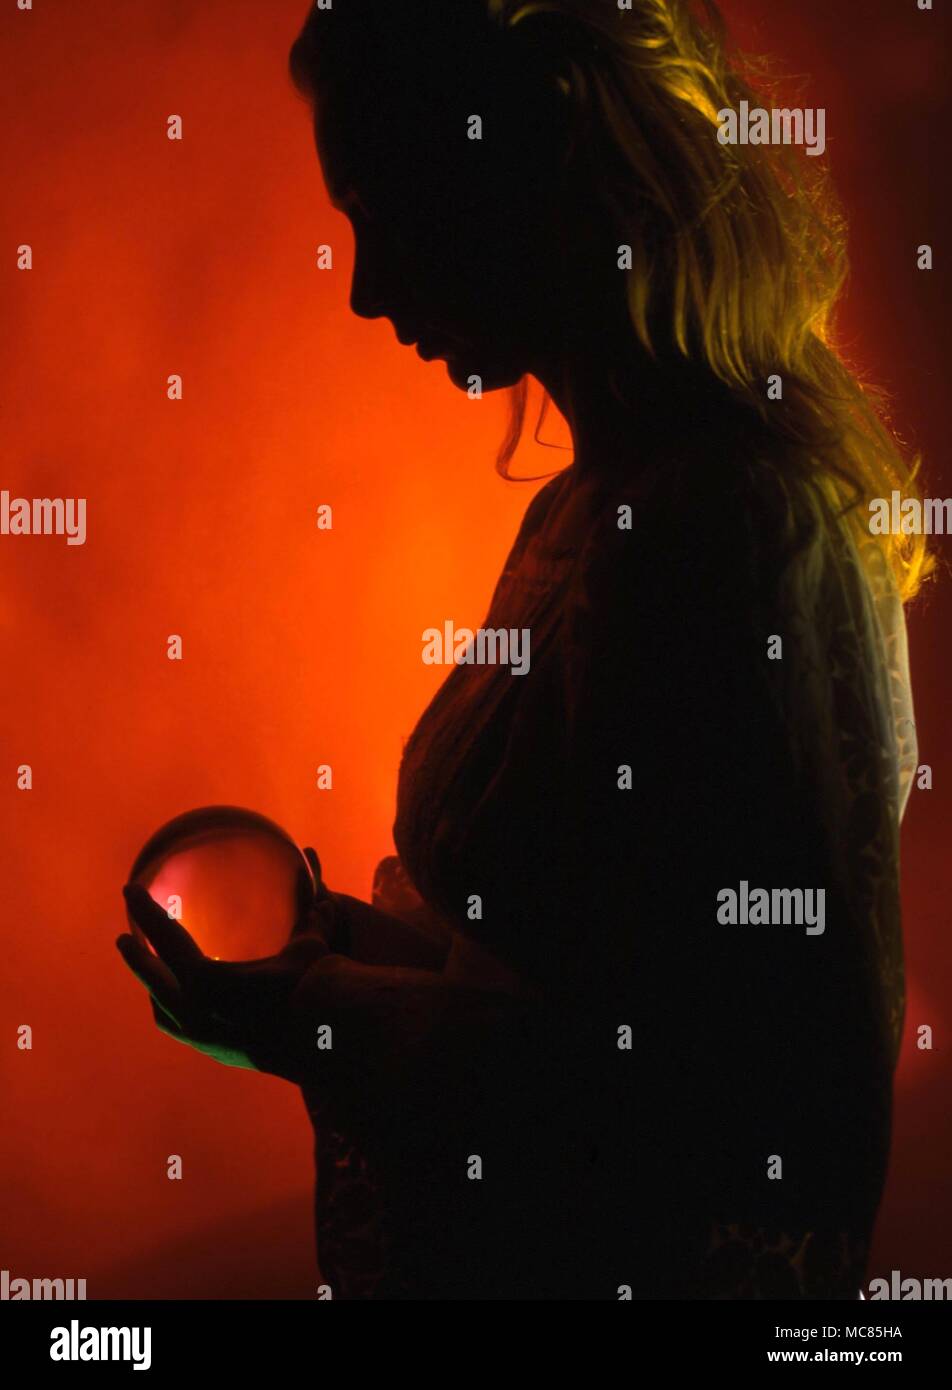 Divination. Girl in silhouette with crystal ball, used for divination. Stock Photo